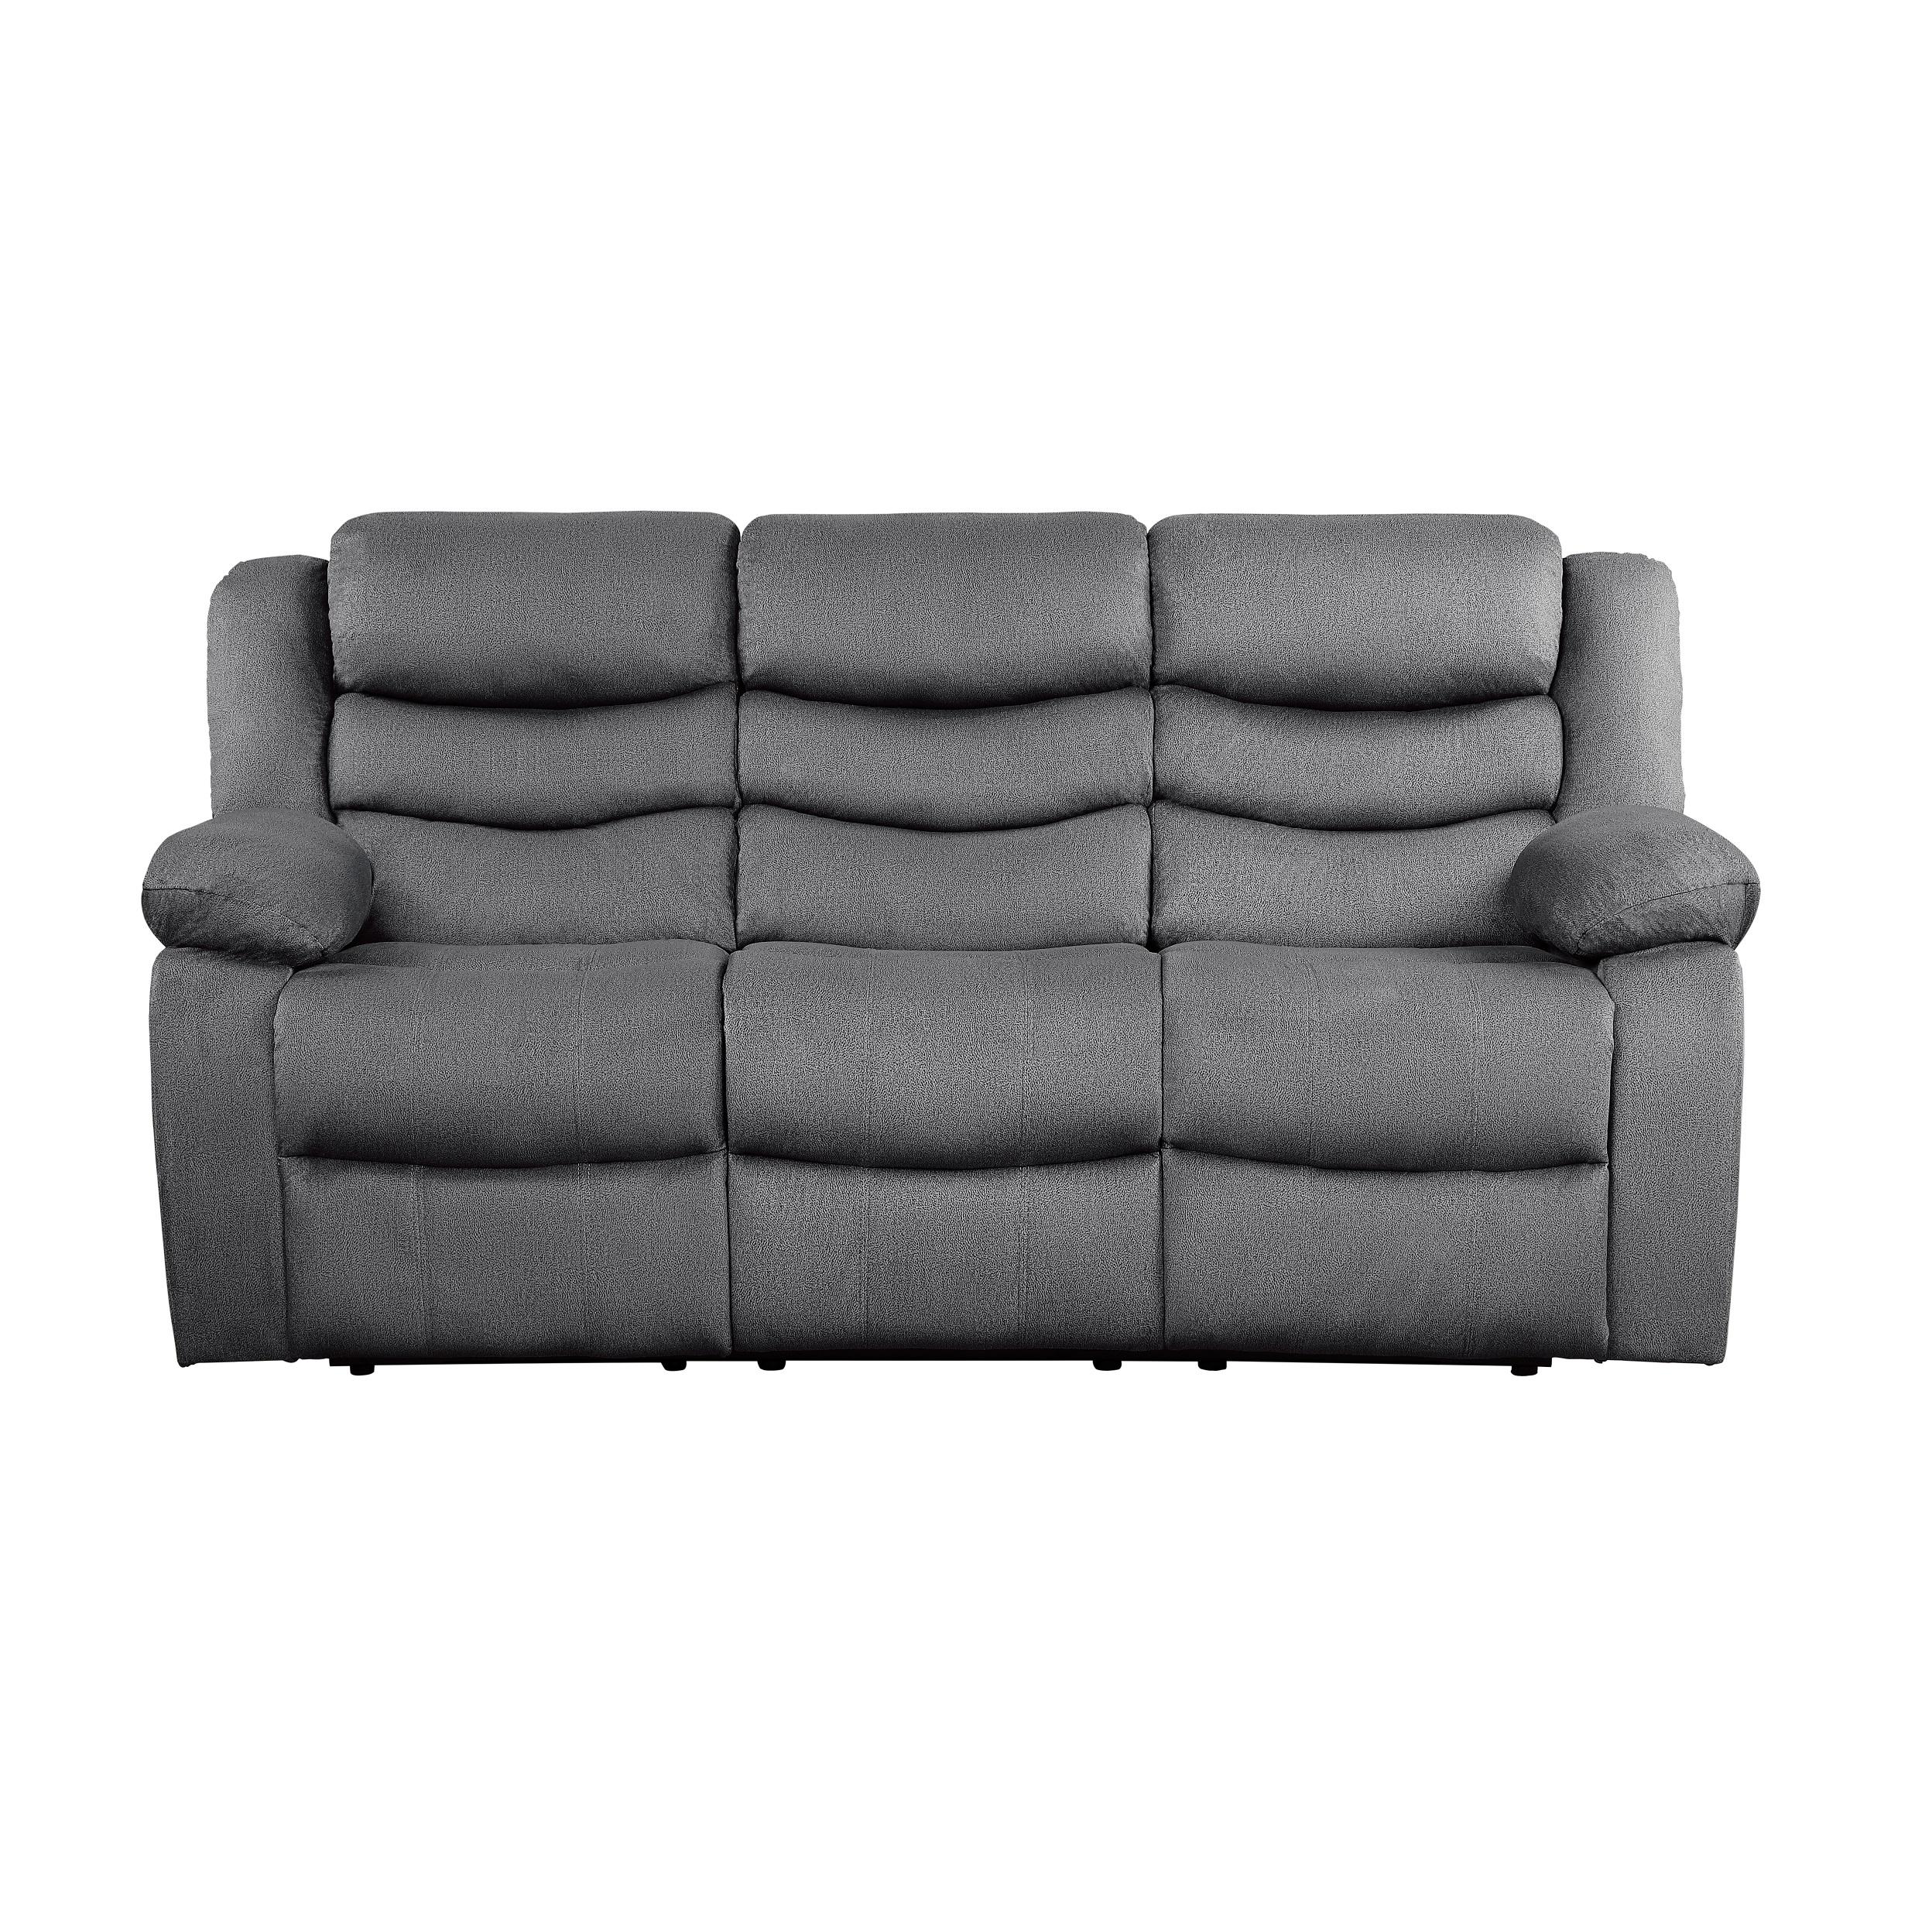 Transitional Reclining Sofa 9526GY-3 Discus 9526GY-3 in Gray Microfiber